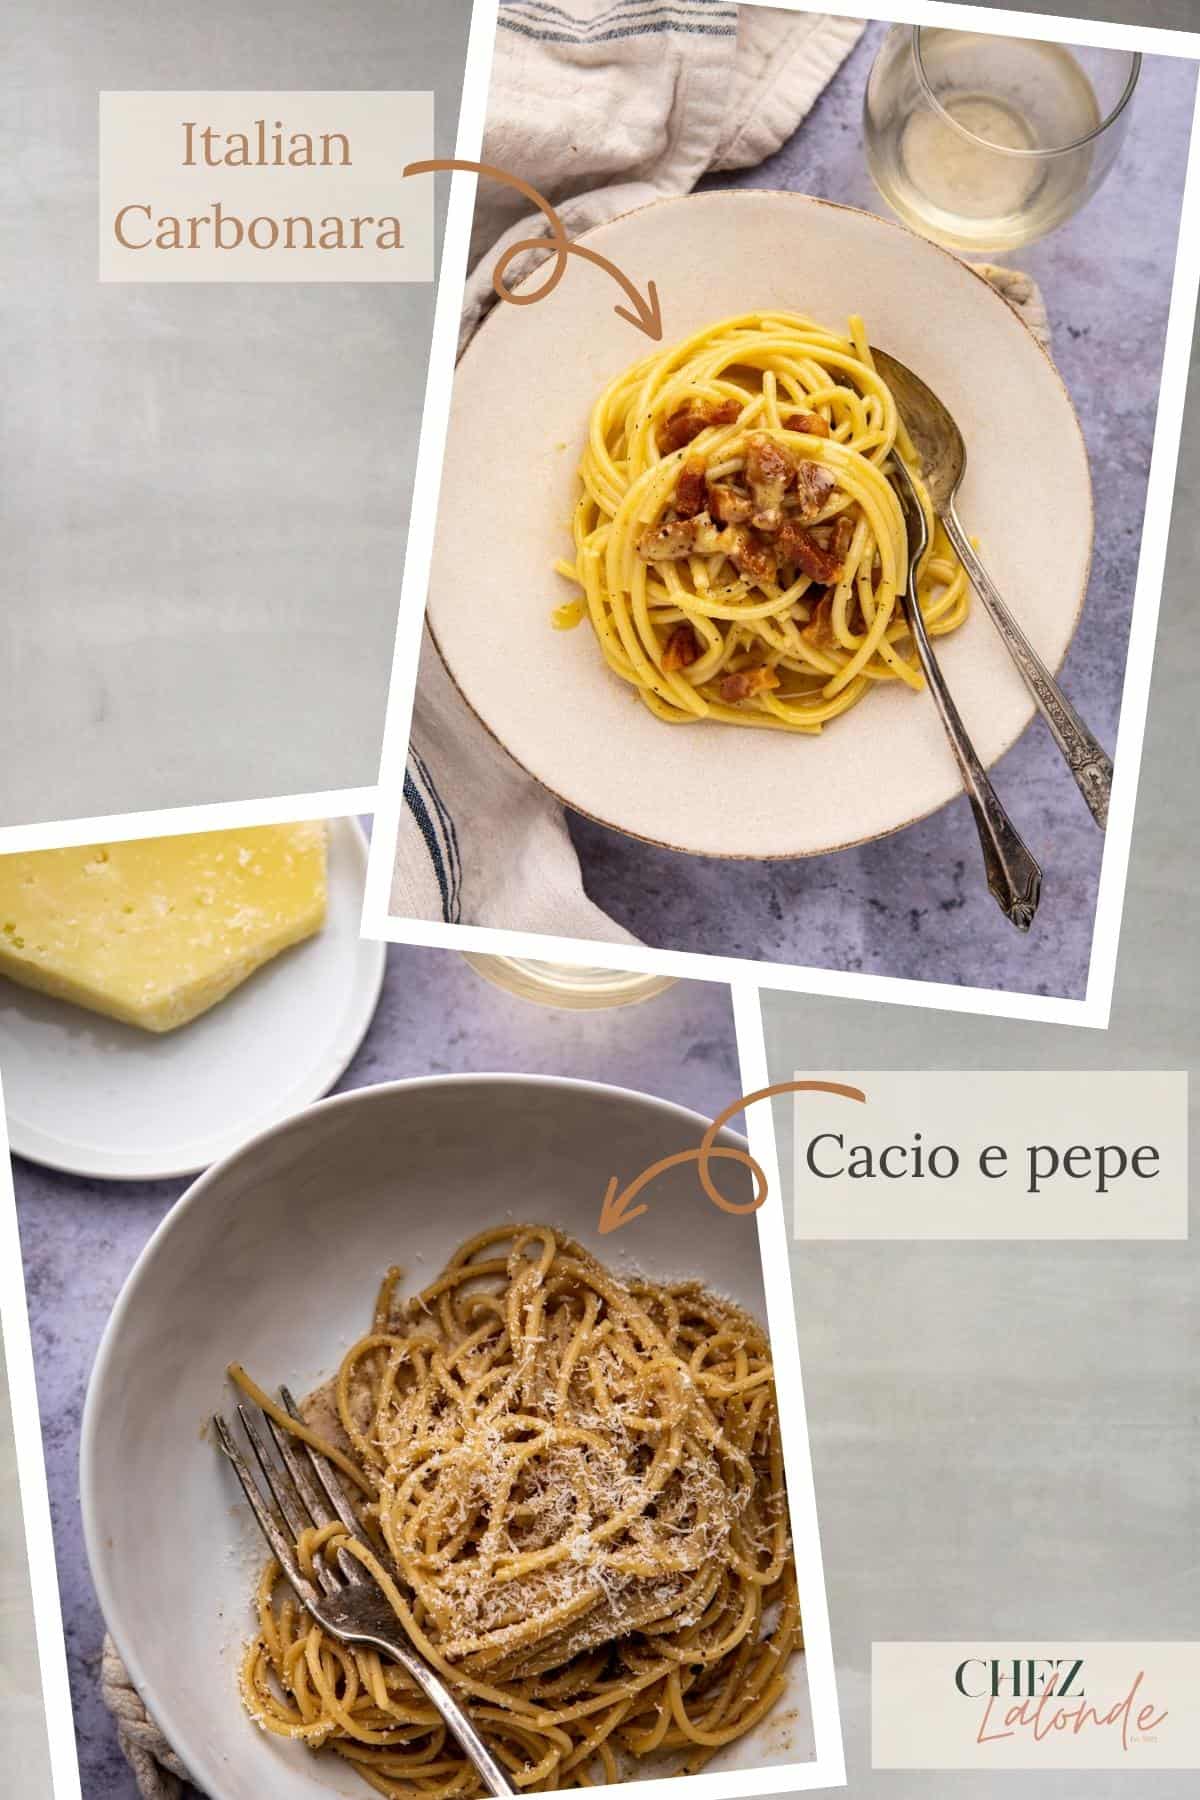 A plate of Carbonara pasta on the top right corner and a plate of cacio e pepe pasta on the lower left corner. 